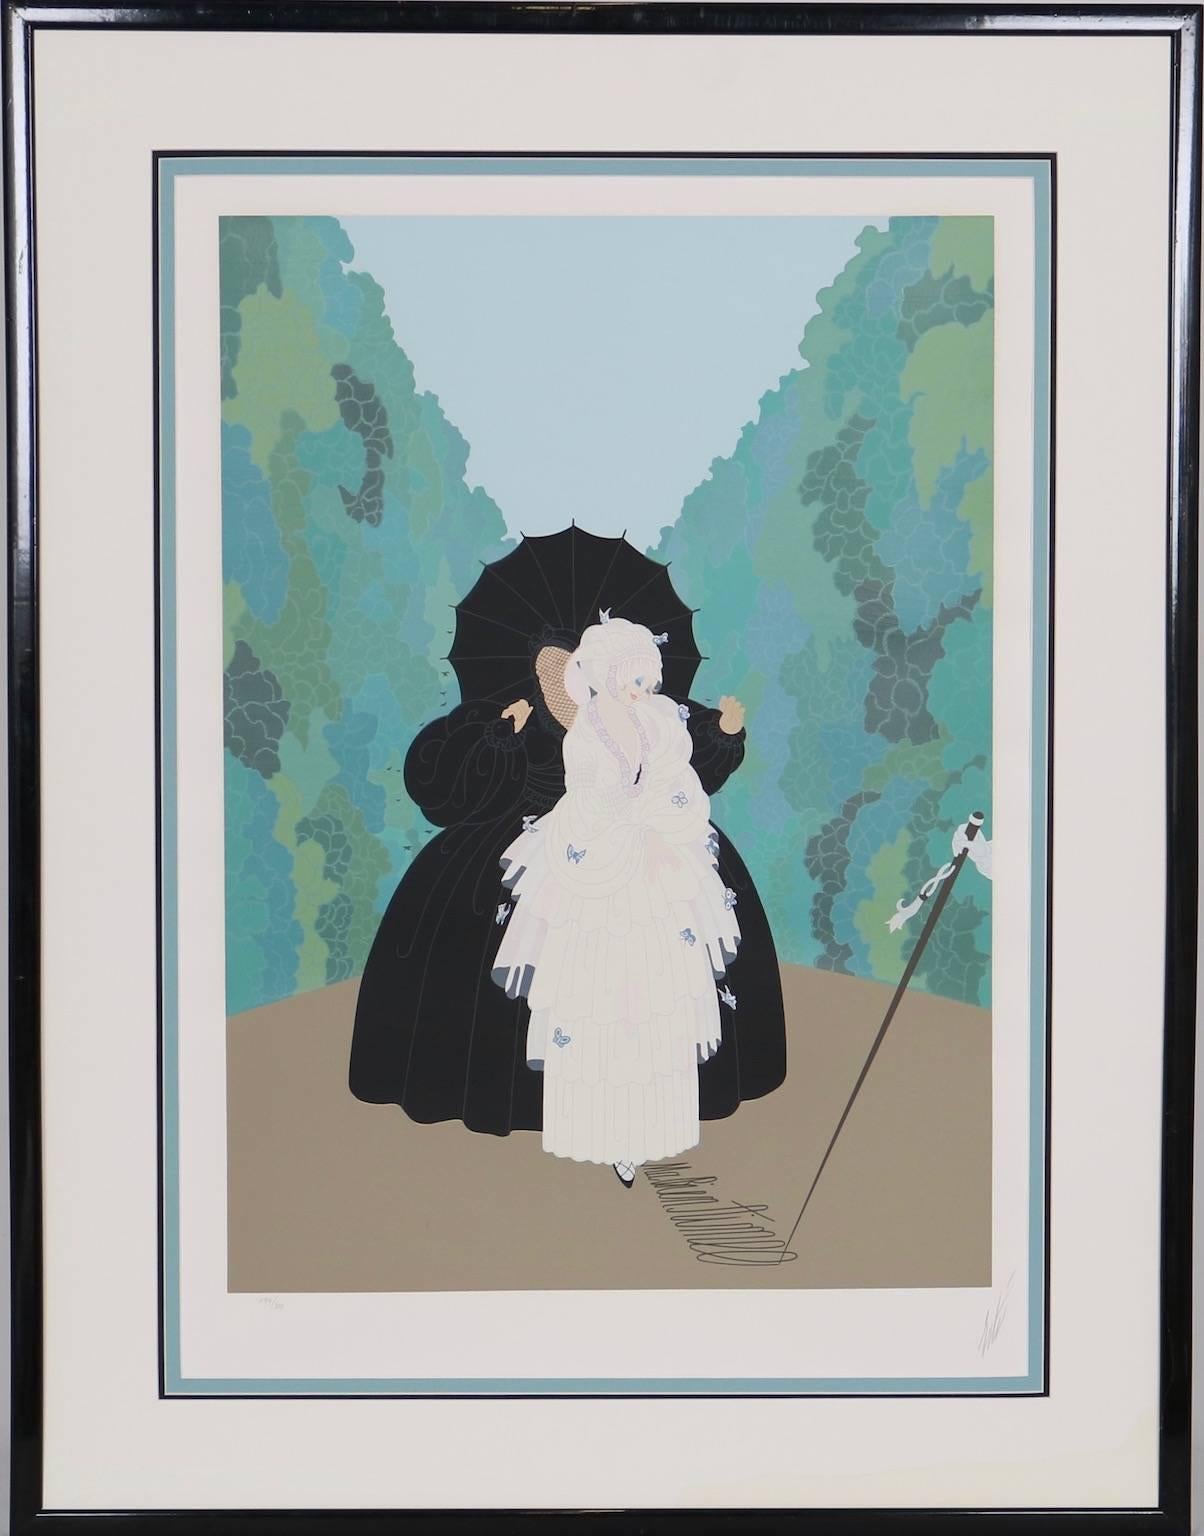 An original signed silkscreen by Erte; numbered 299/300. Titled 'Debutante'; depicts a stylized young woman in an all white dress with her guardian who is wearing all black including veil and parasol strolling among a corridor of foliage. The print